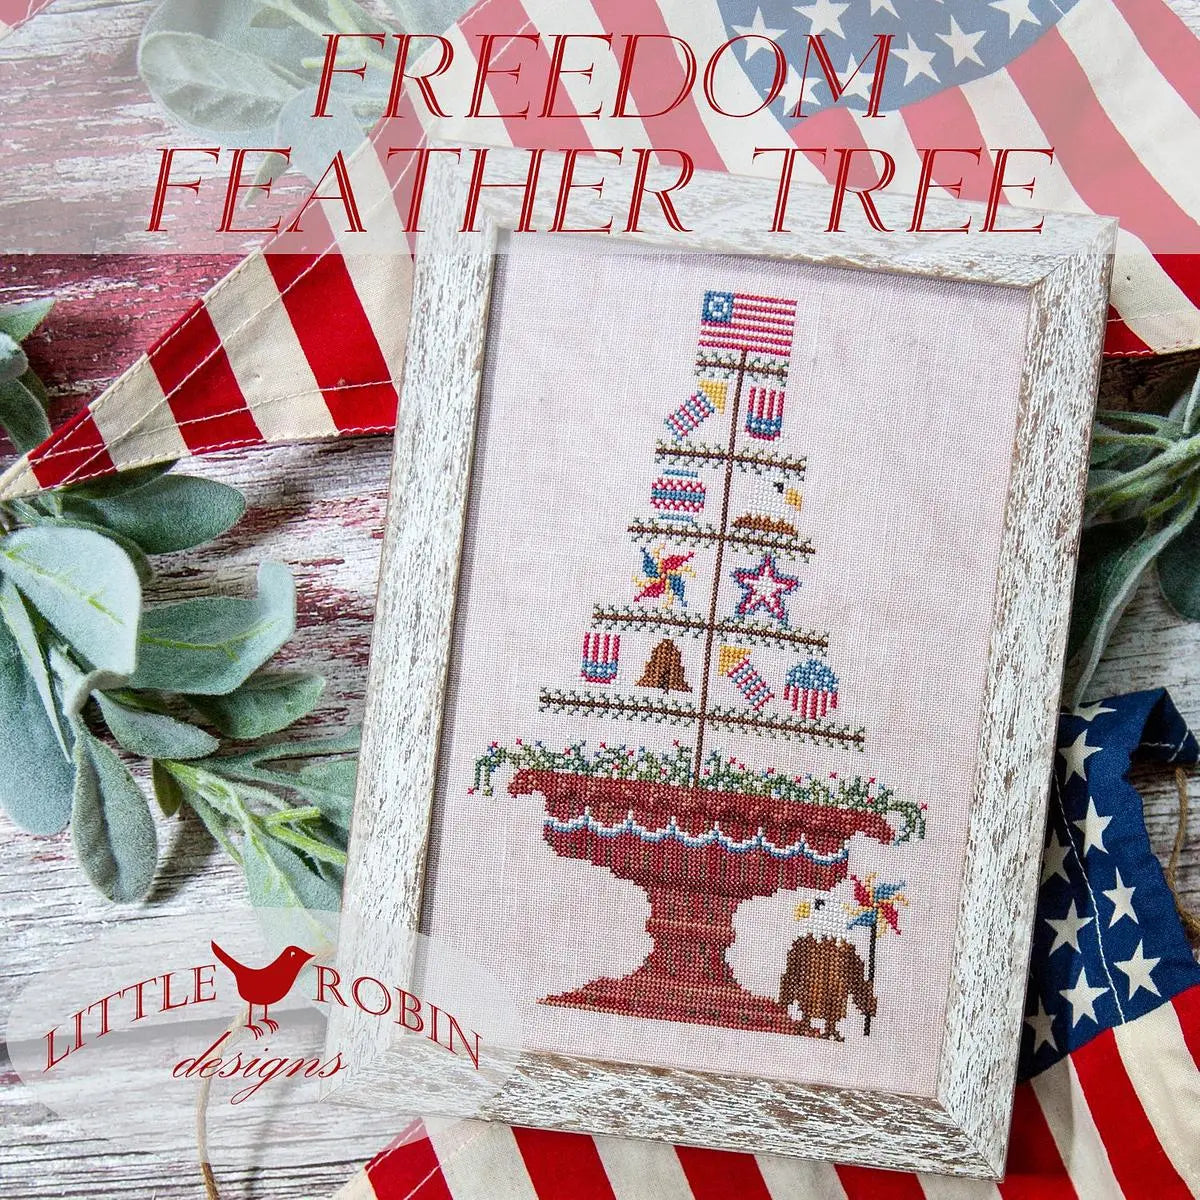 Freedom Feather Tree by Little Robin Designs Little Robin Designs